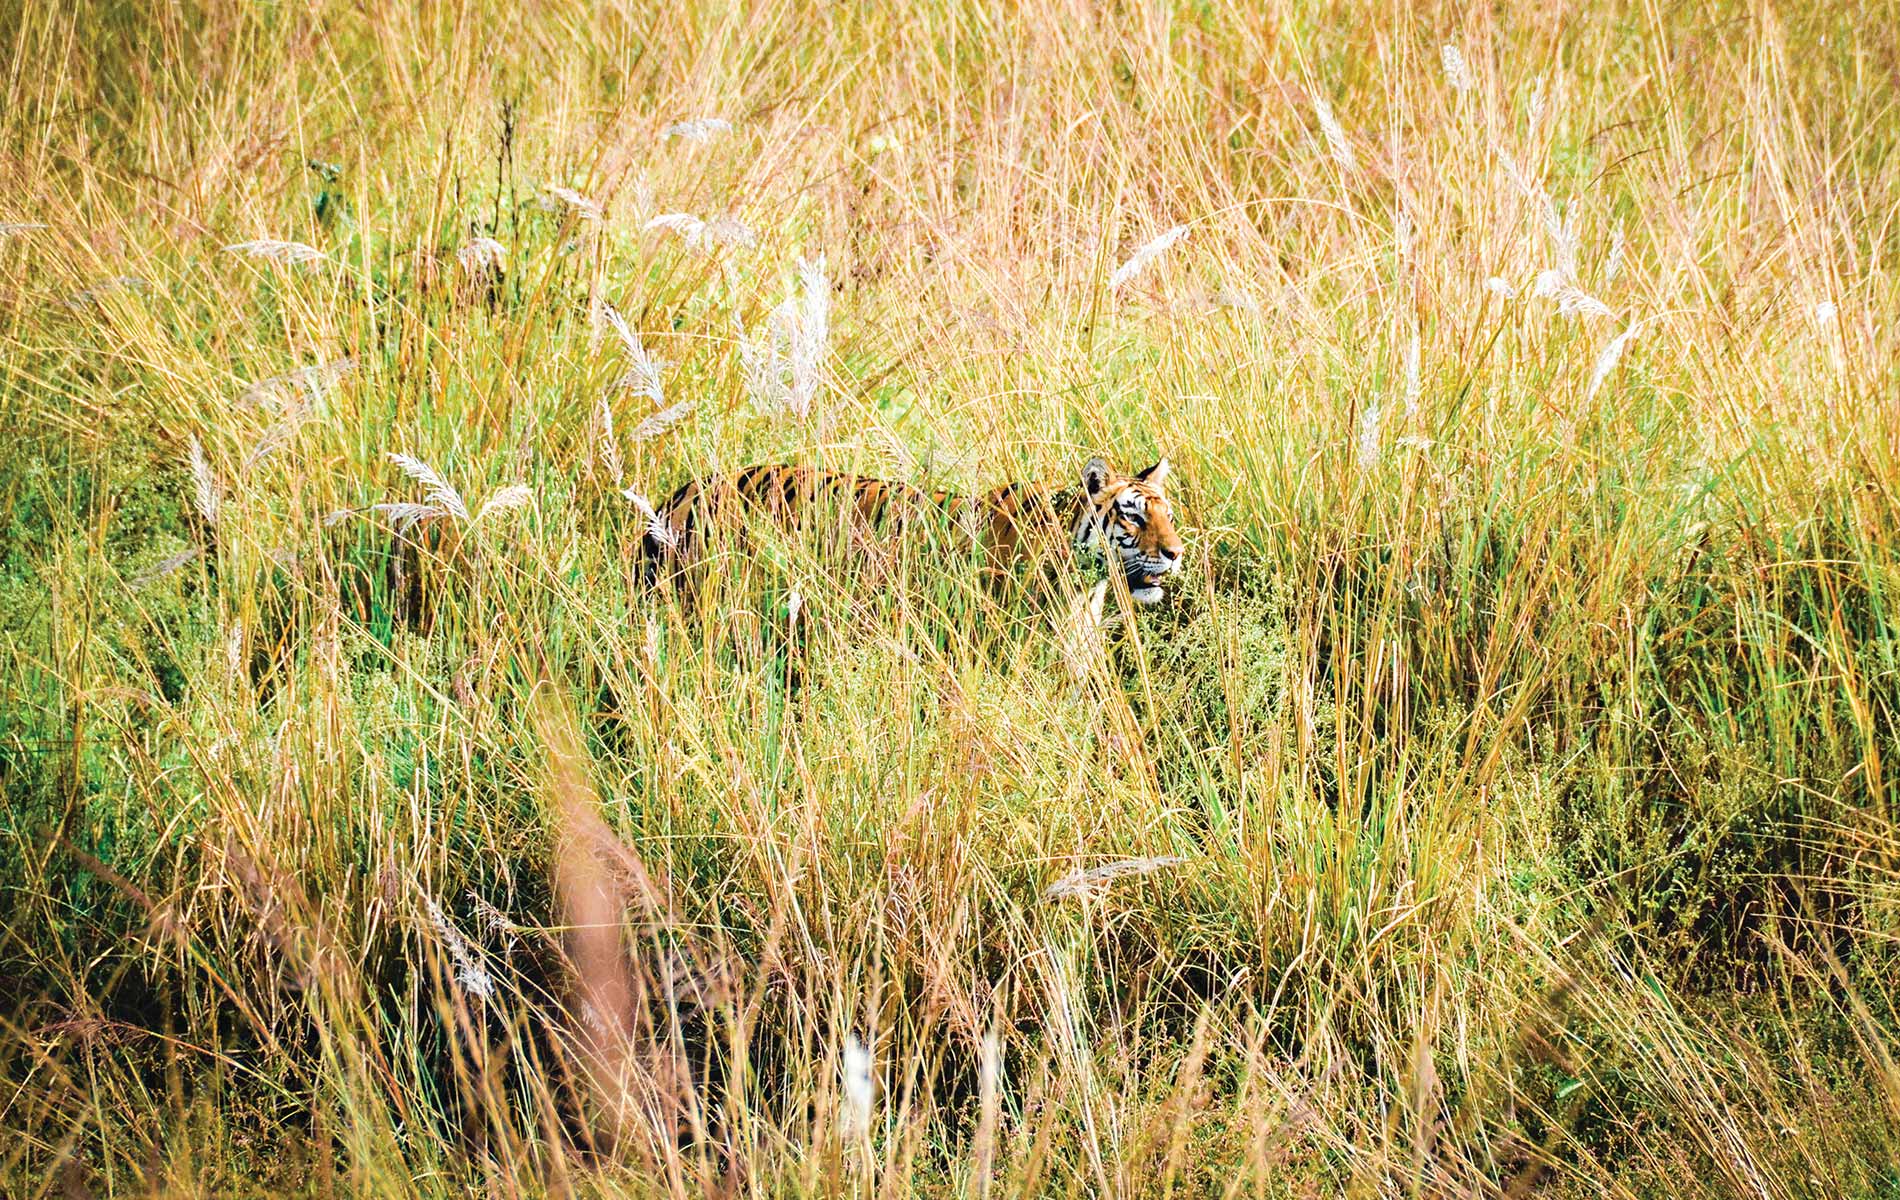 The tiger’s stripes provide excellent camouflage in tall grass—making it particularly elusive to photographers visiting the tiger reserves in Madhya Pradesh, India.